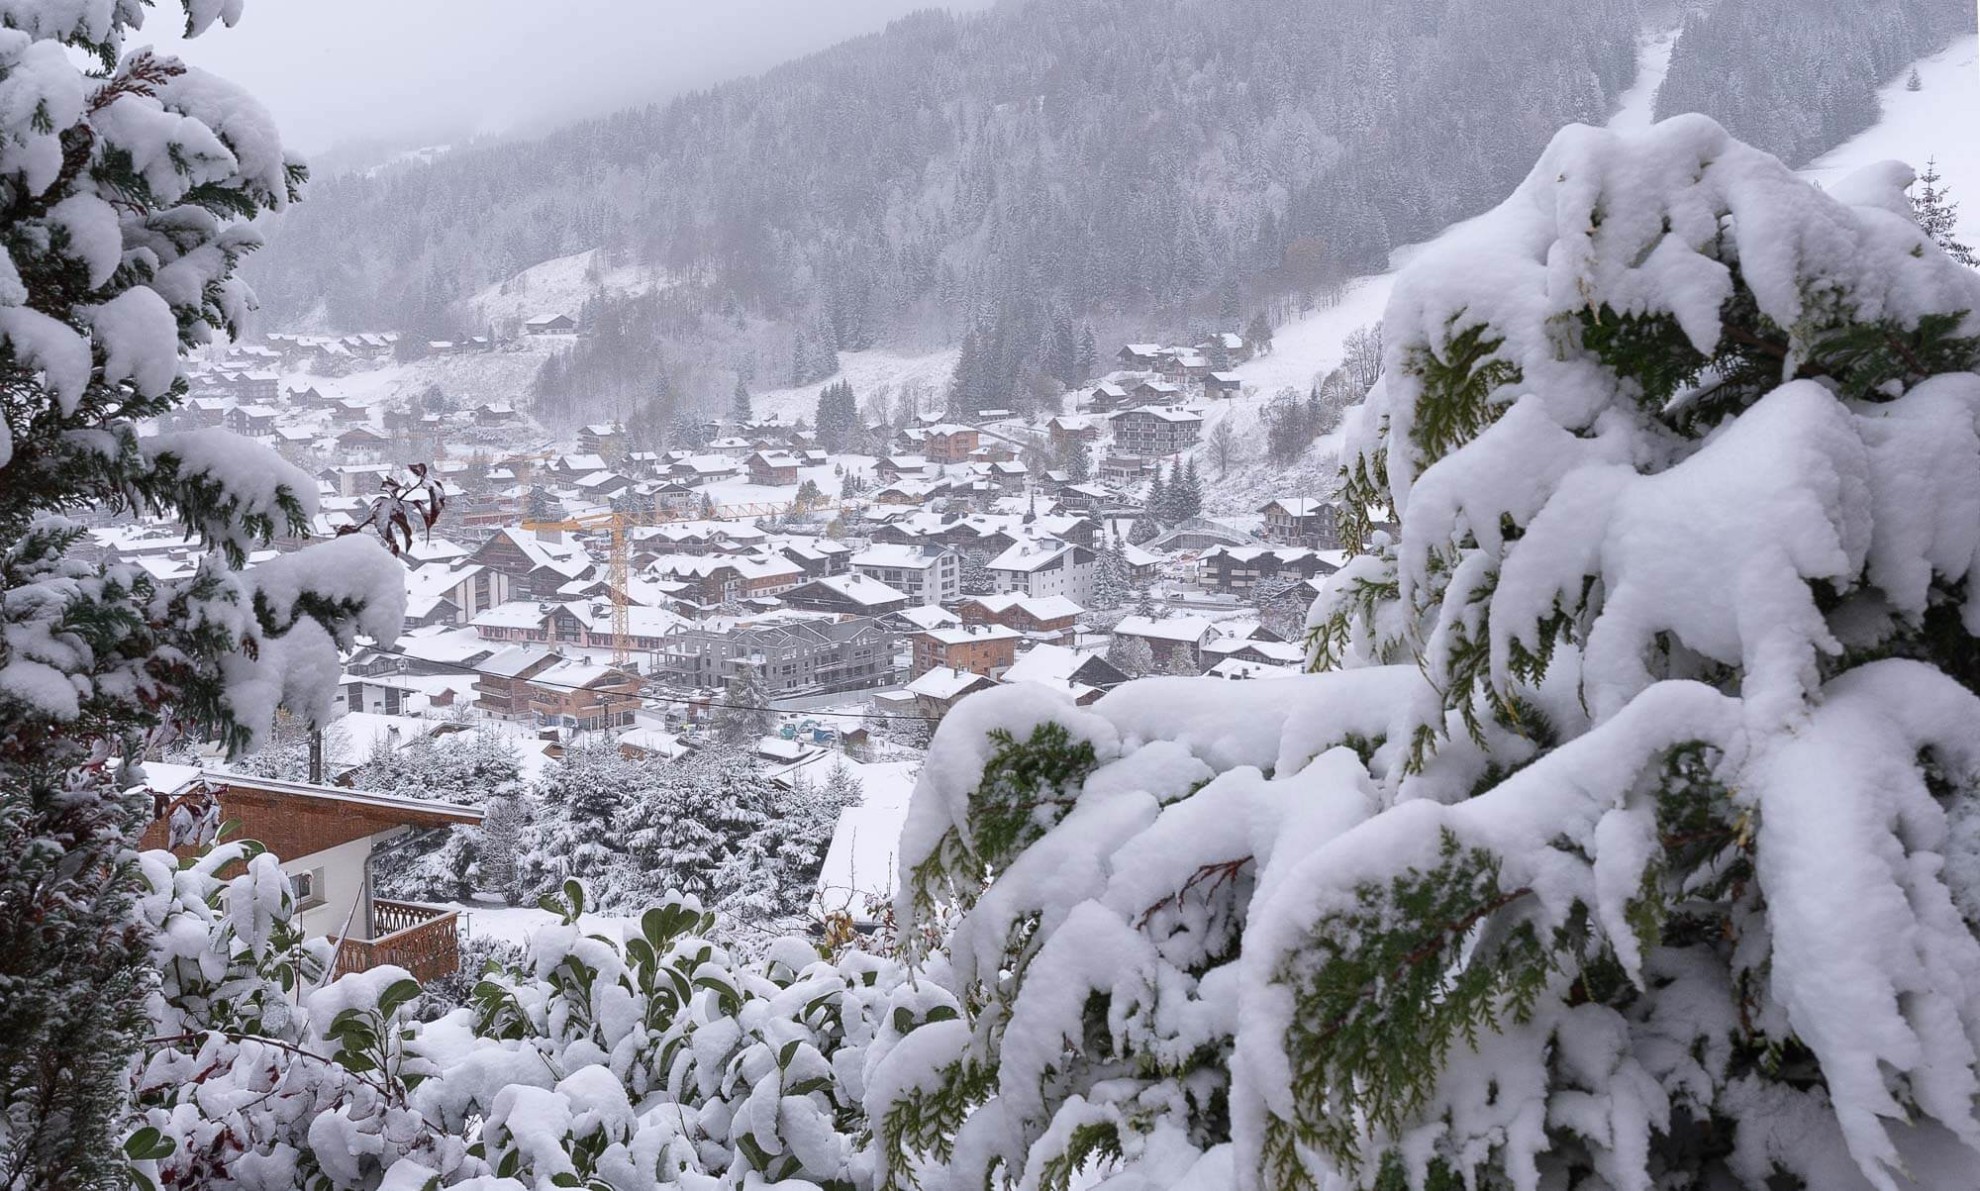 Les Gets - Fresh snow in the village in October - Pictures